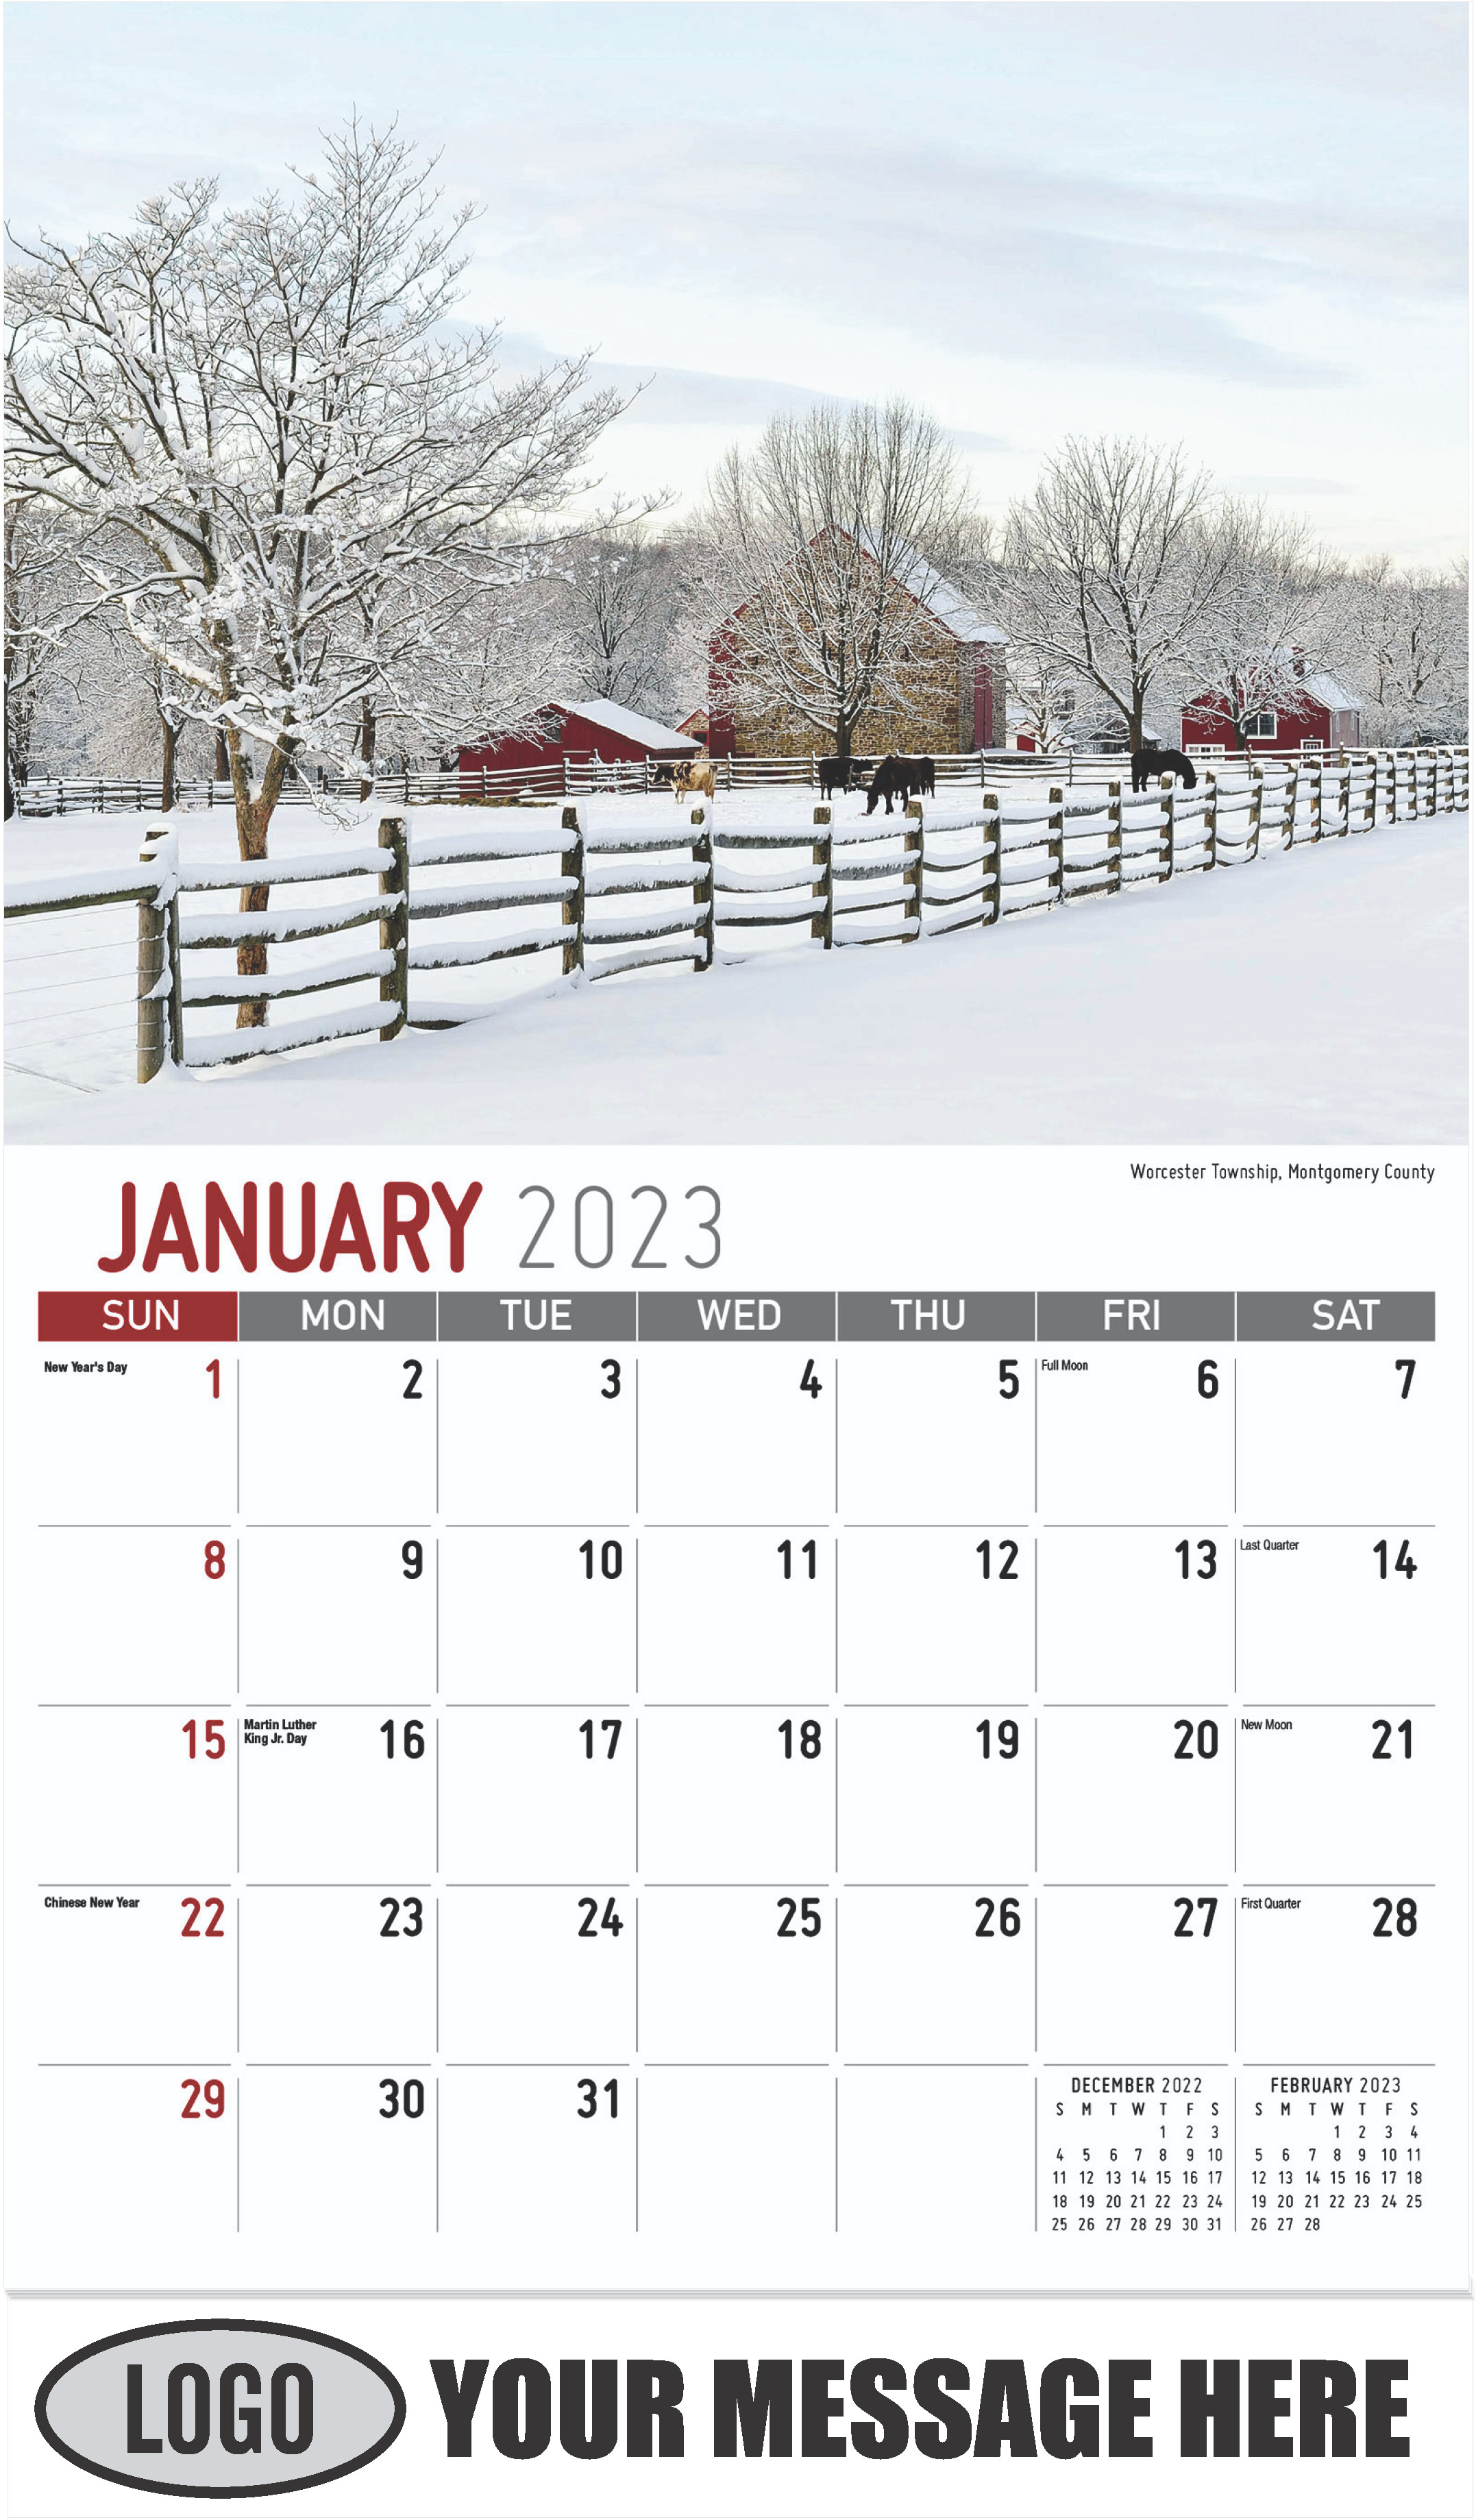 Worcester Township, Montgomery County - January - Scenes of Pennsylvania 2023 Promotional Calendar